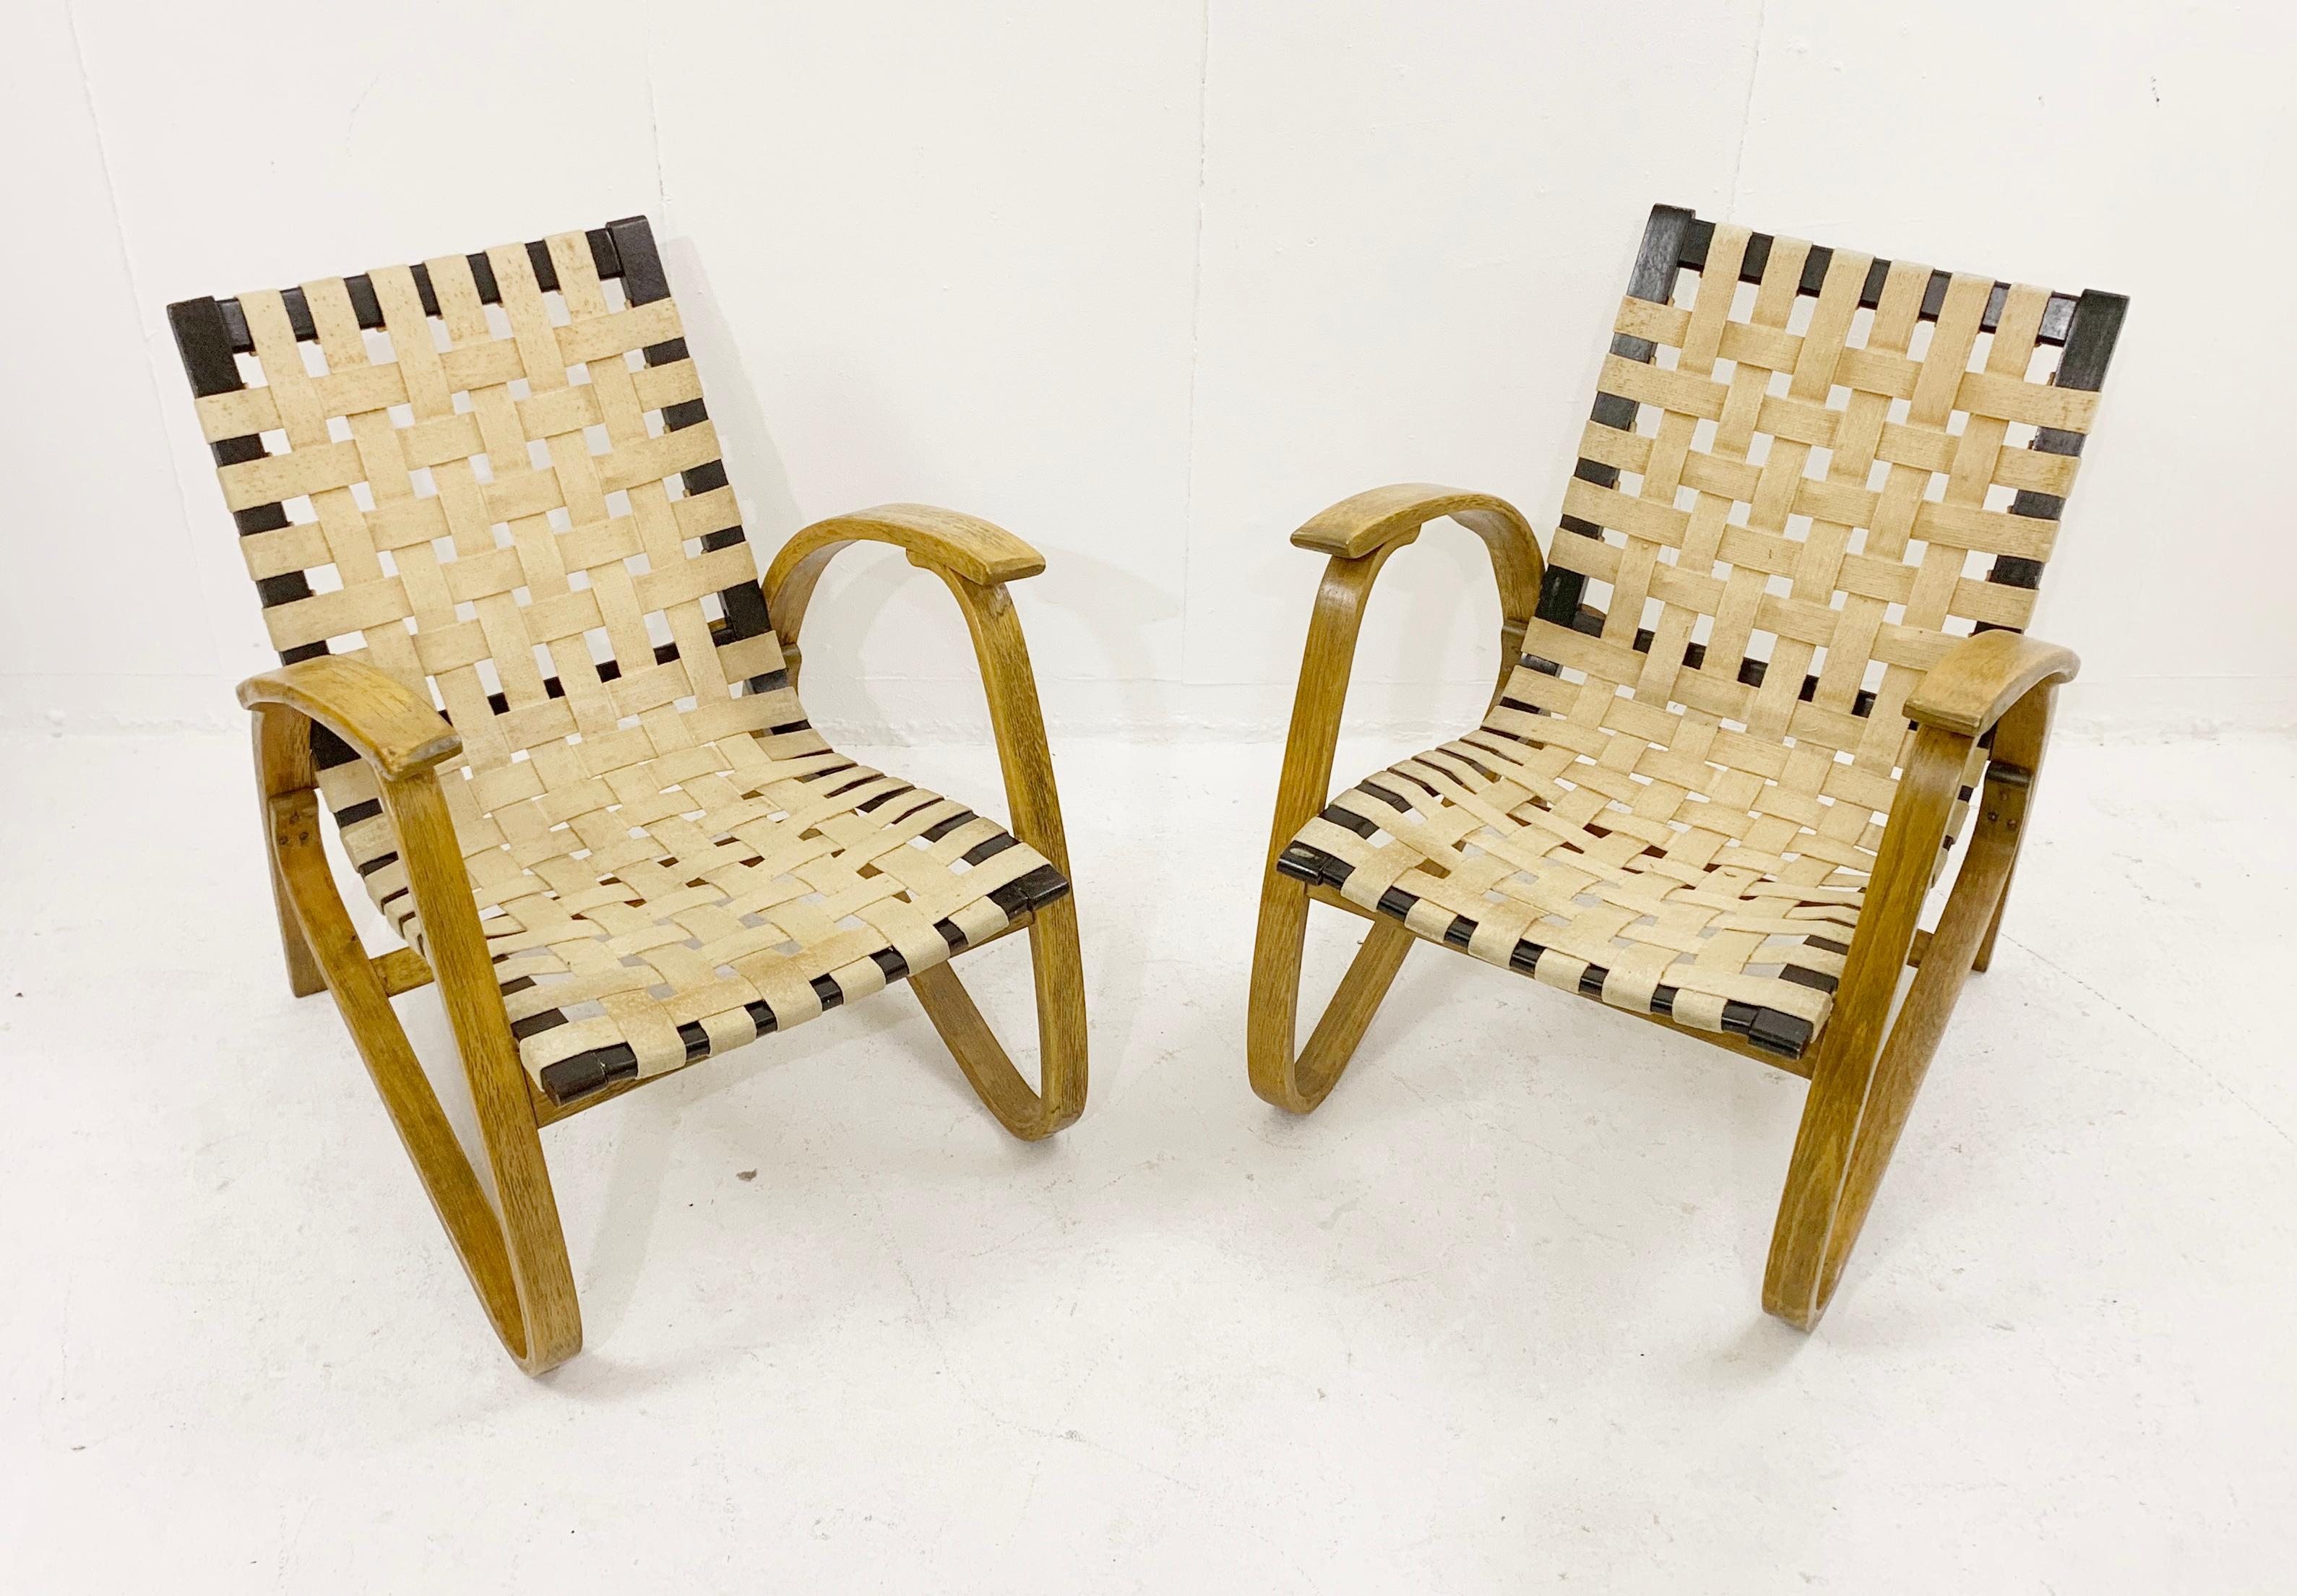 Pair of bentwood armchairs By Jan Vanek For UP Závody - Czech republic 1930s.